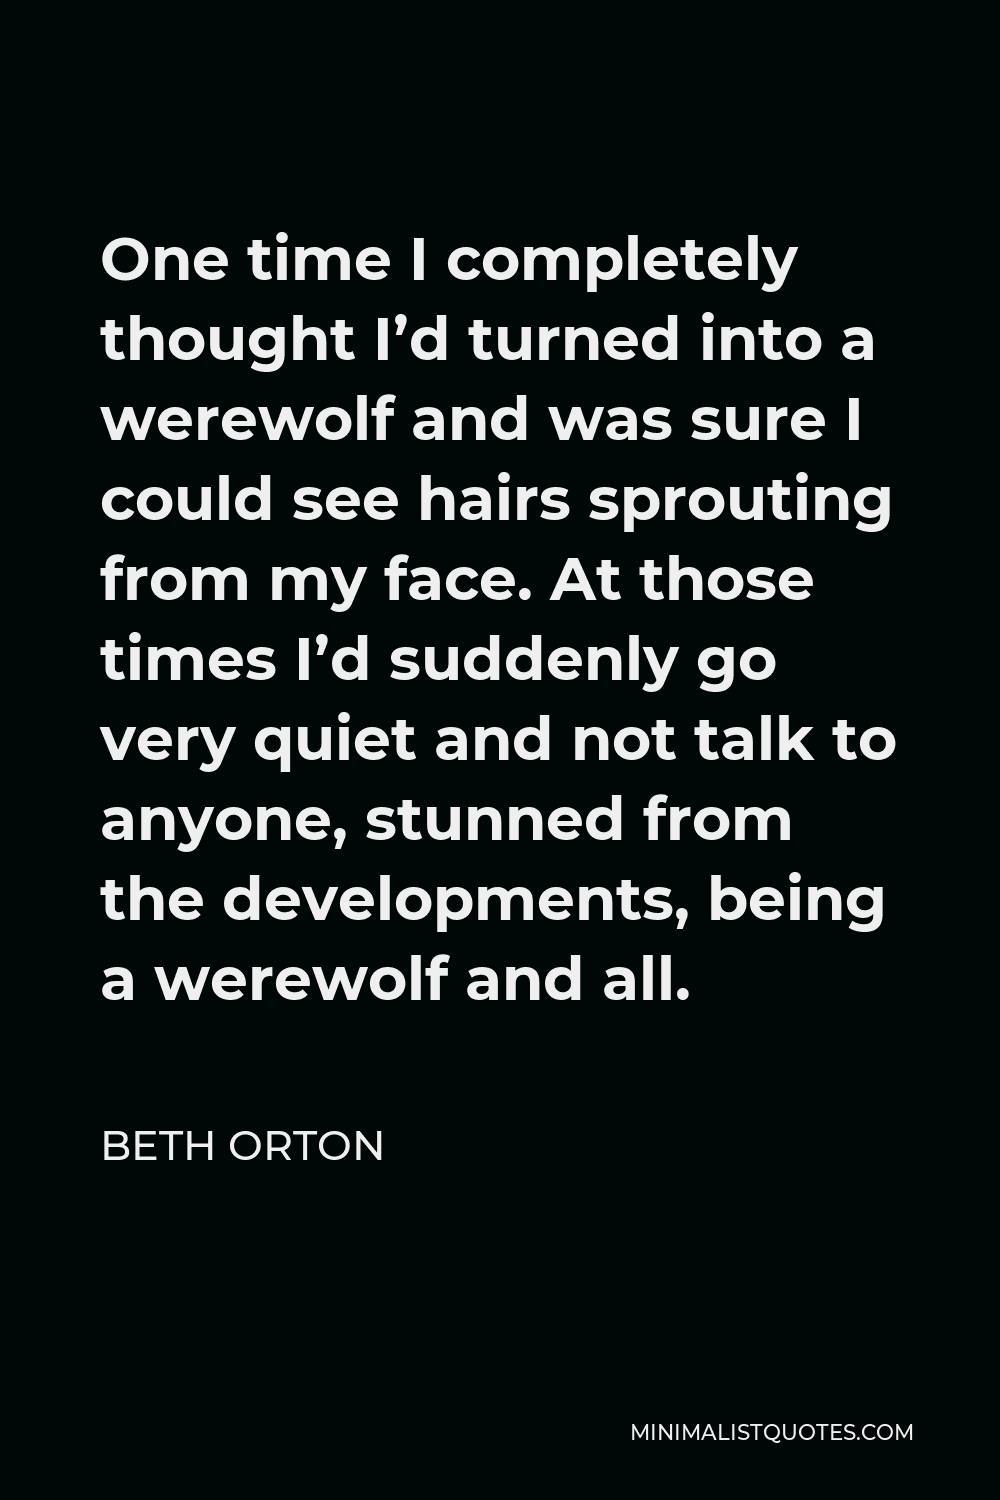 Beth Orton Quote - One time I completely thought I’d turned into a werewolf and was sure I could see hairs sprouting from my face. At those times I’d suddenly go very quiet and not talk to anyone, stunned from the developments, being a werewolf and all.